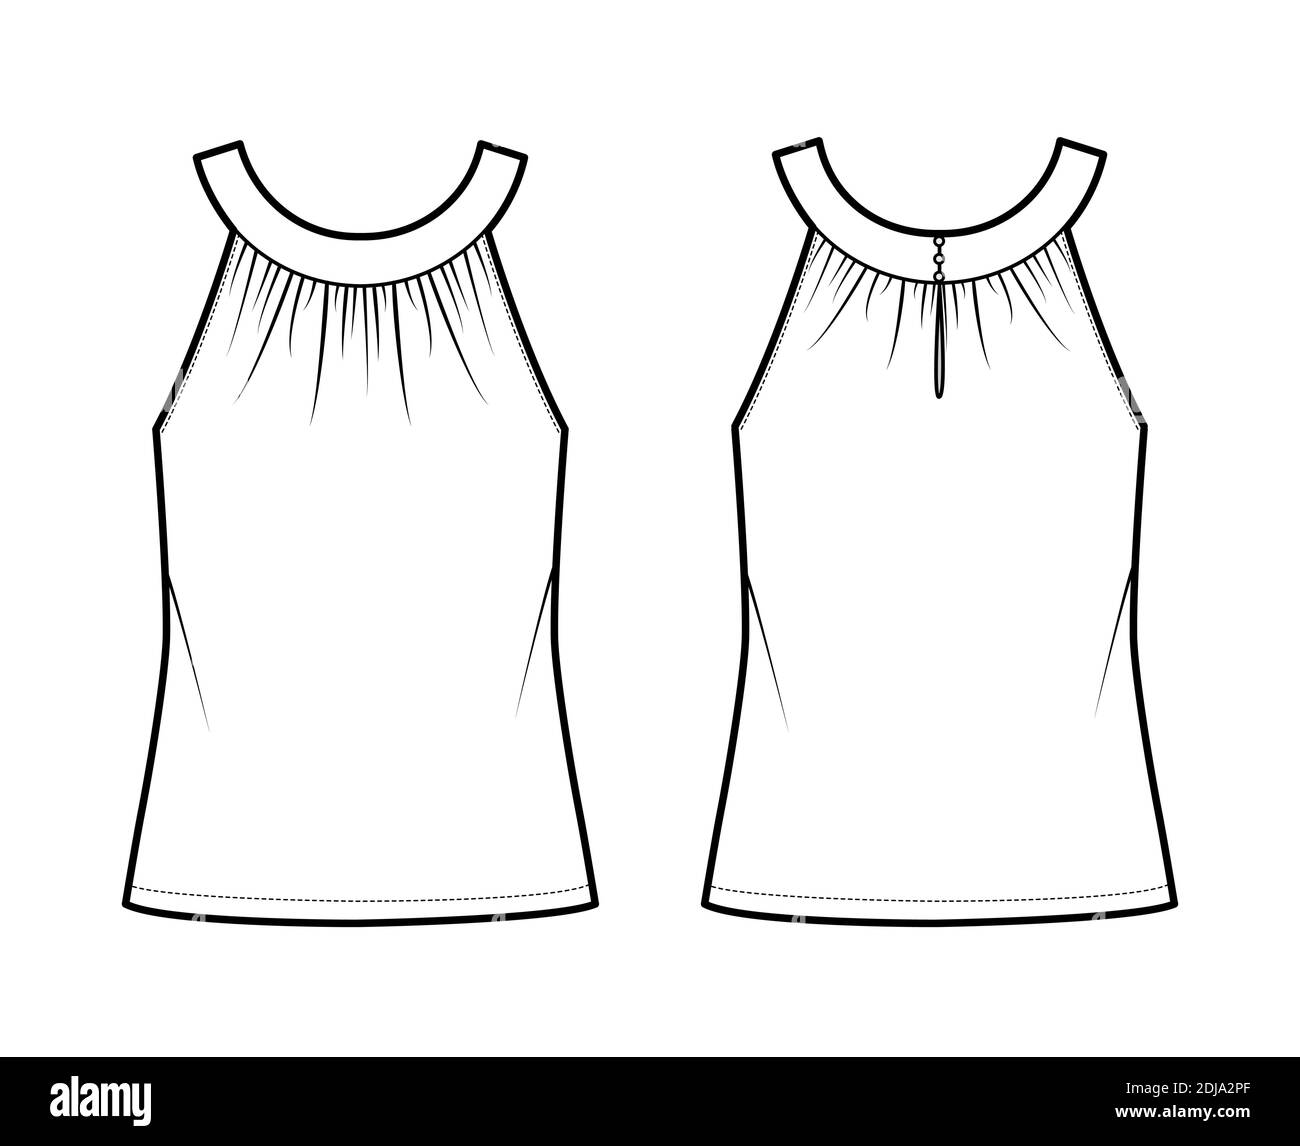 Top rounded neck band tank technical fashion illustration with ruching ...